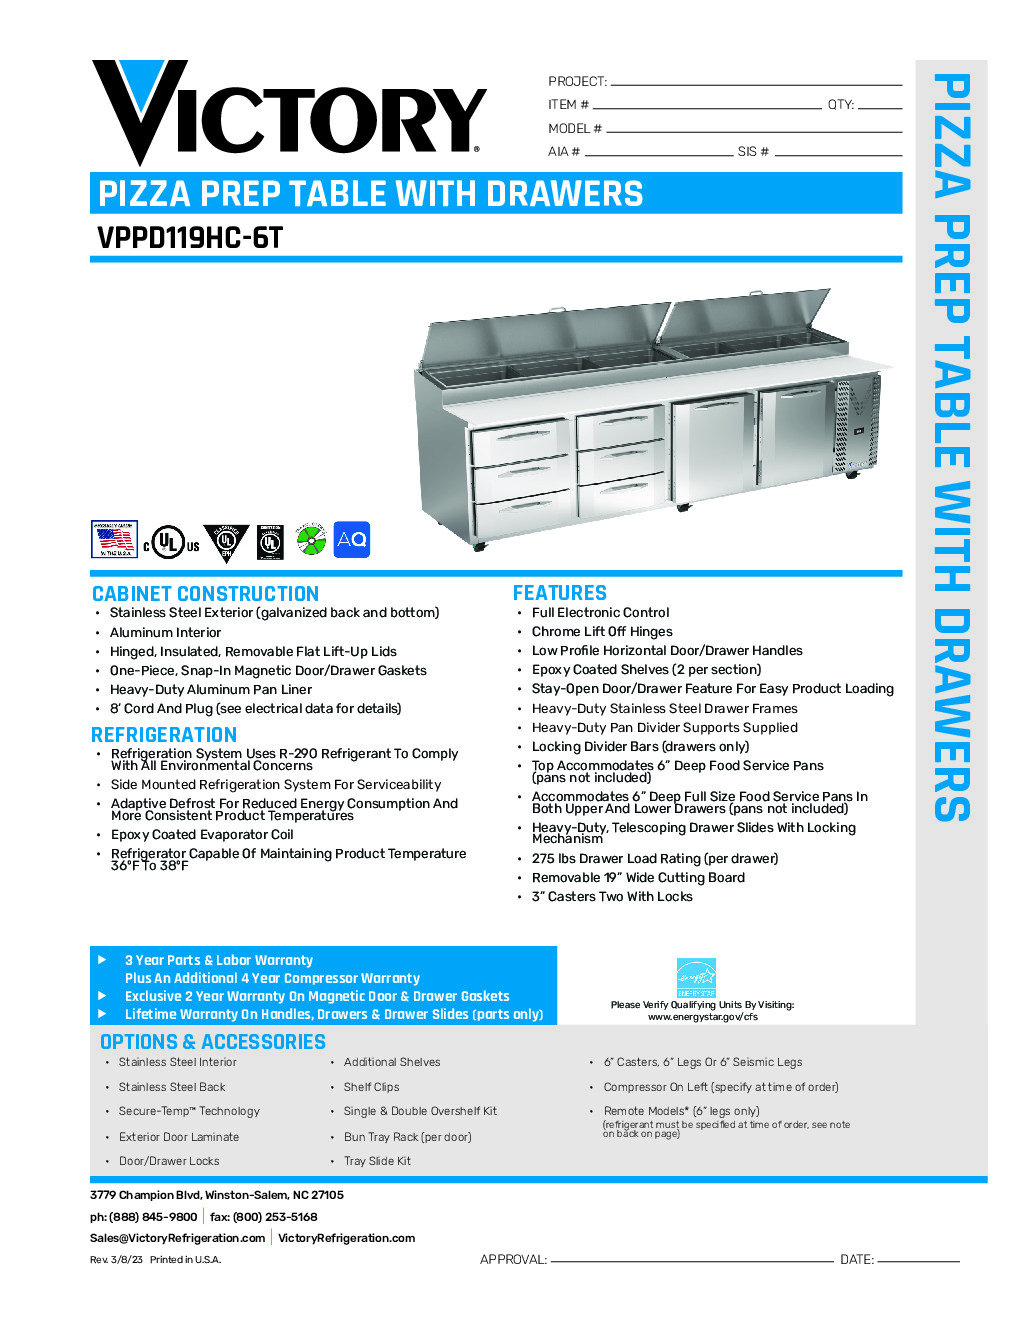 Victory VPPD119HC-6T Pizza Prep Table Refrigerated Counter